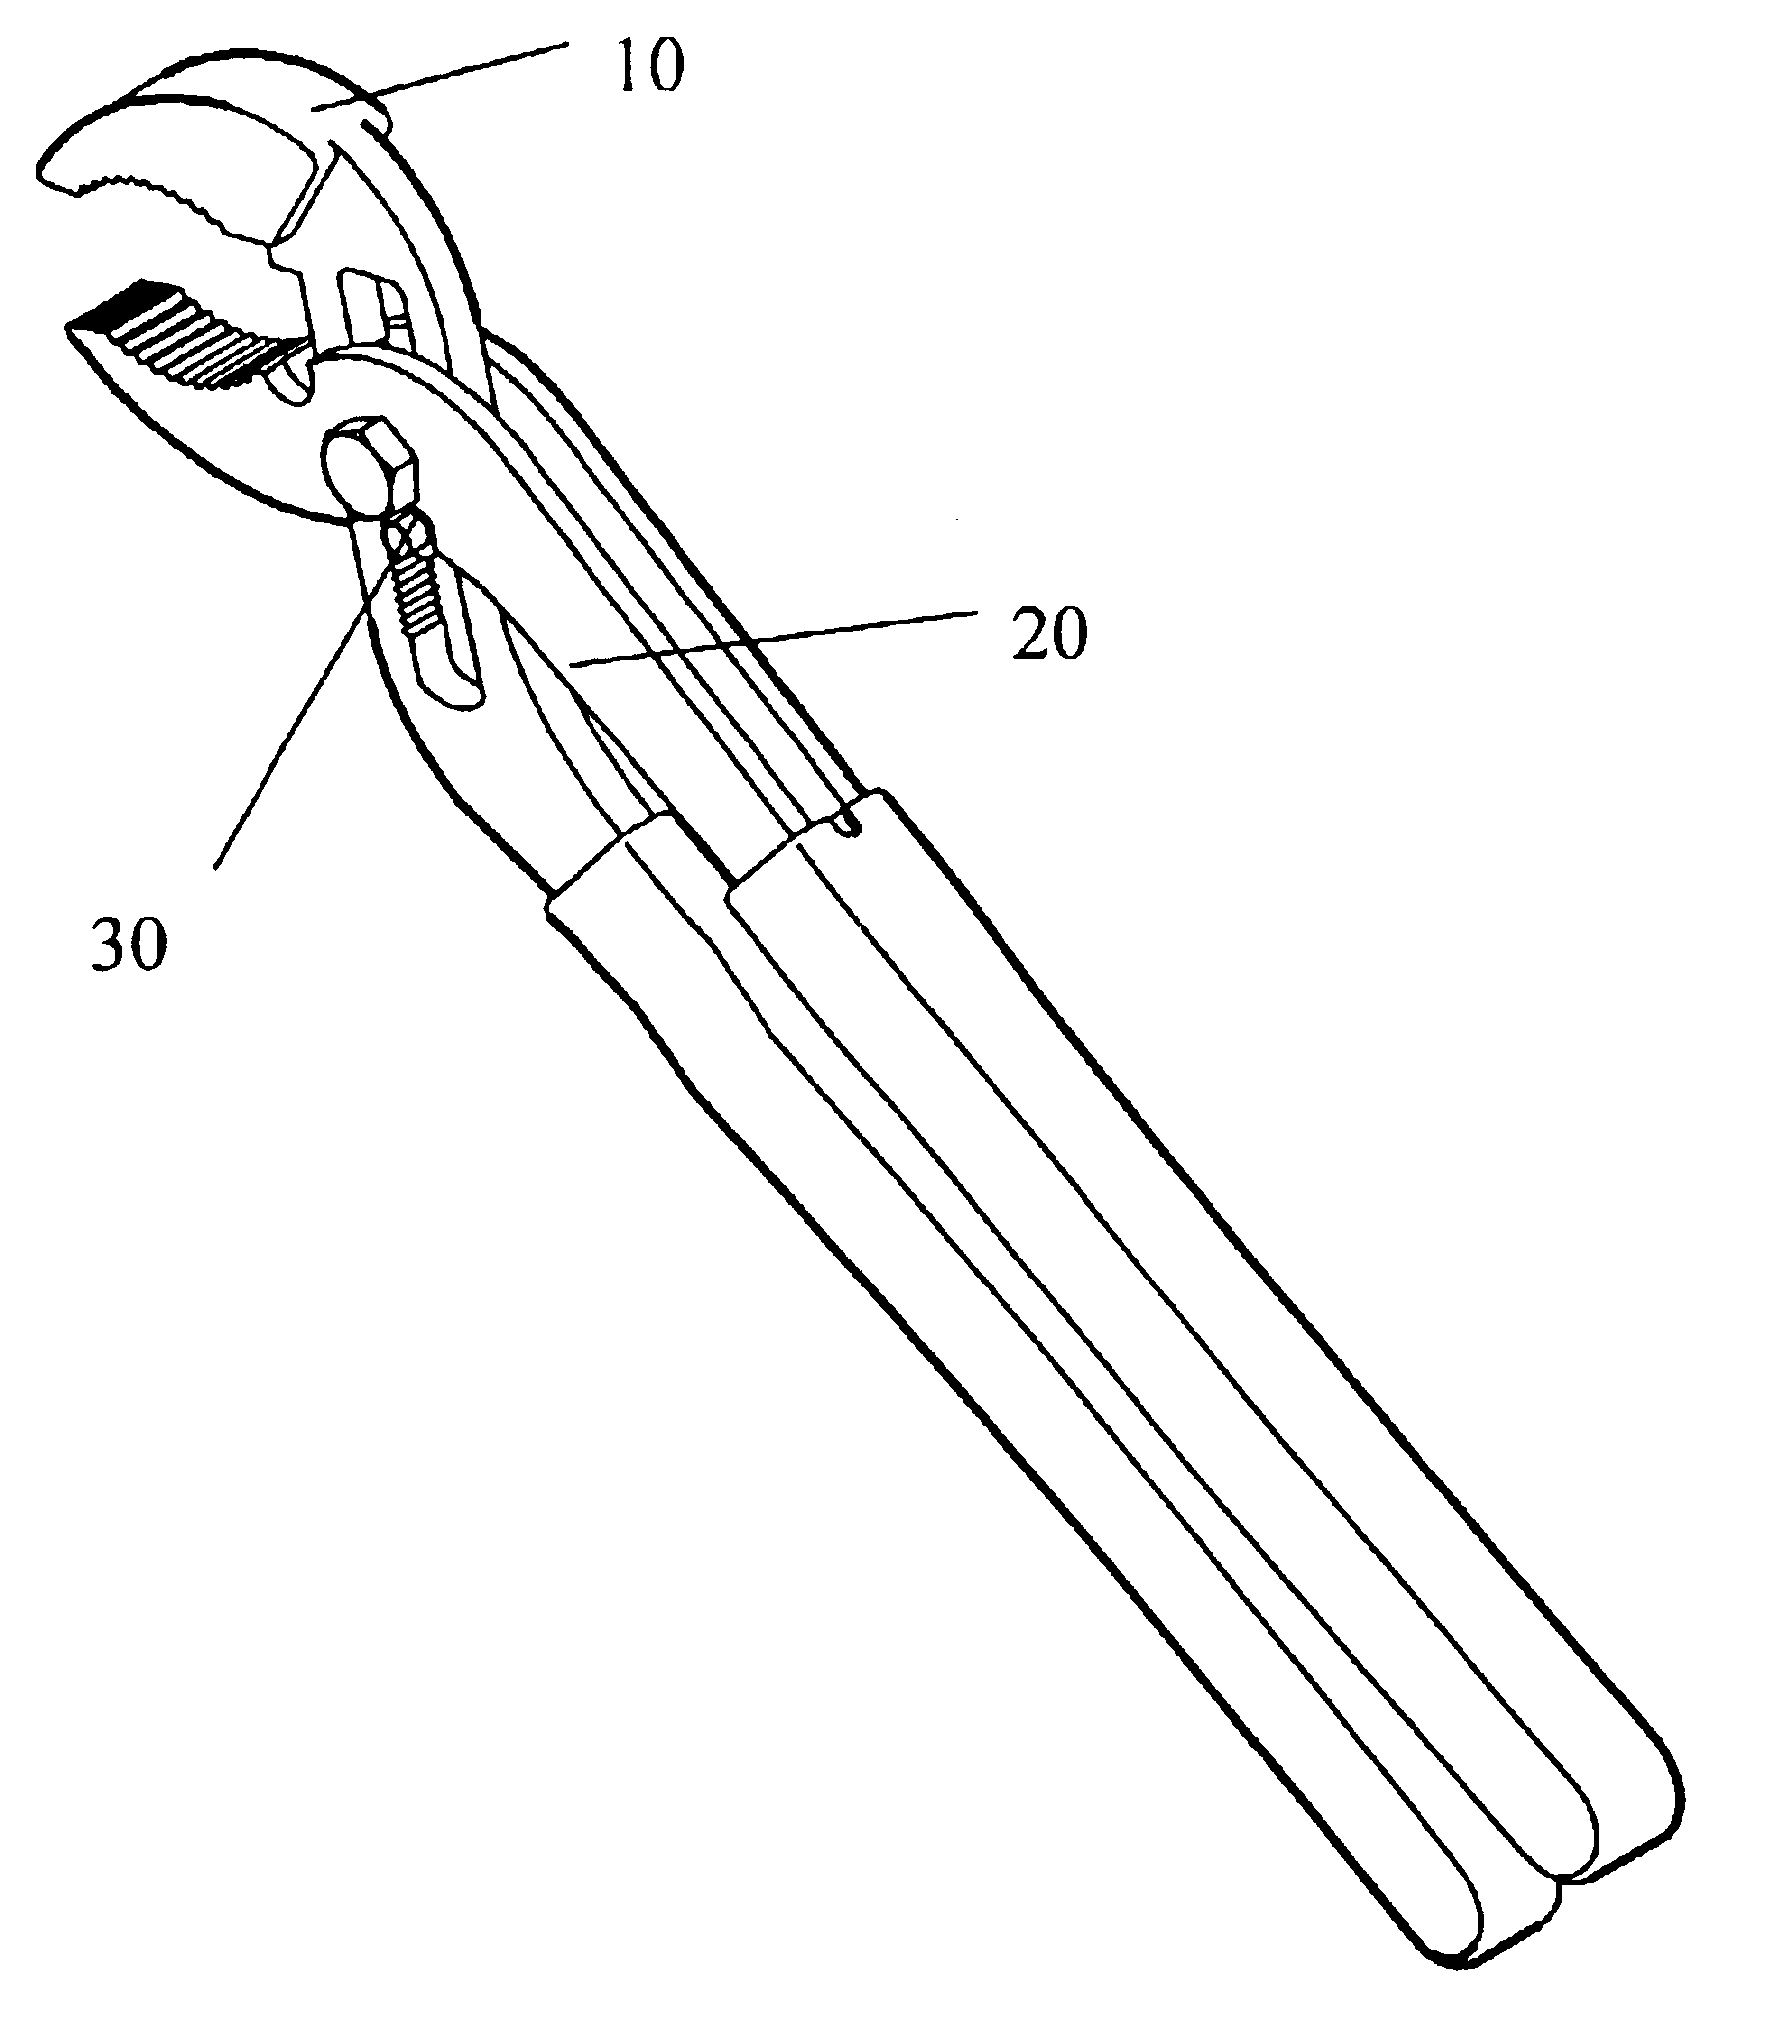 Pliers with movable joint